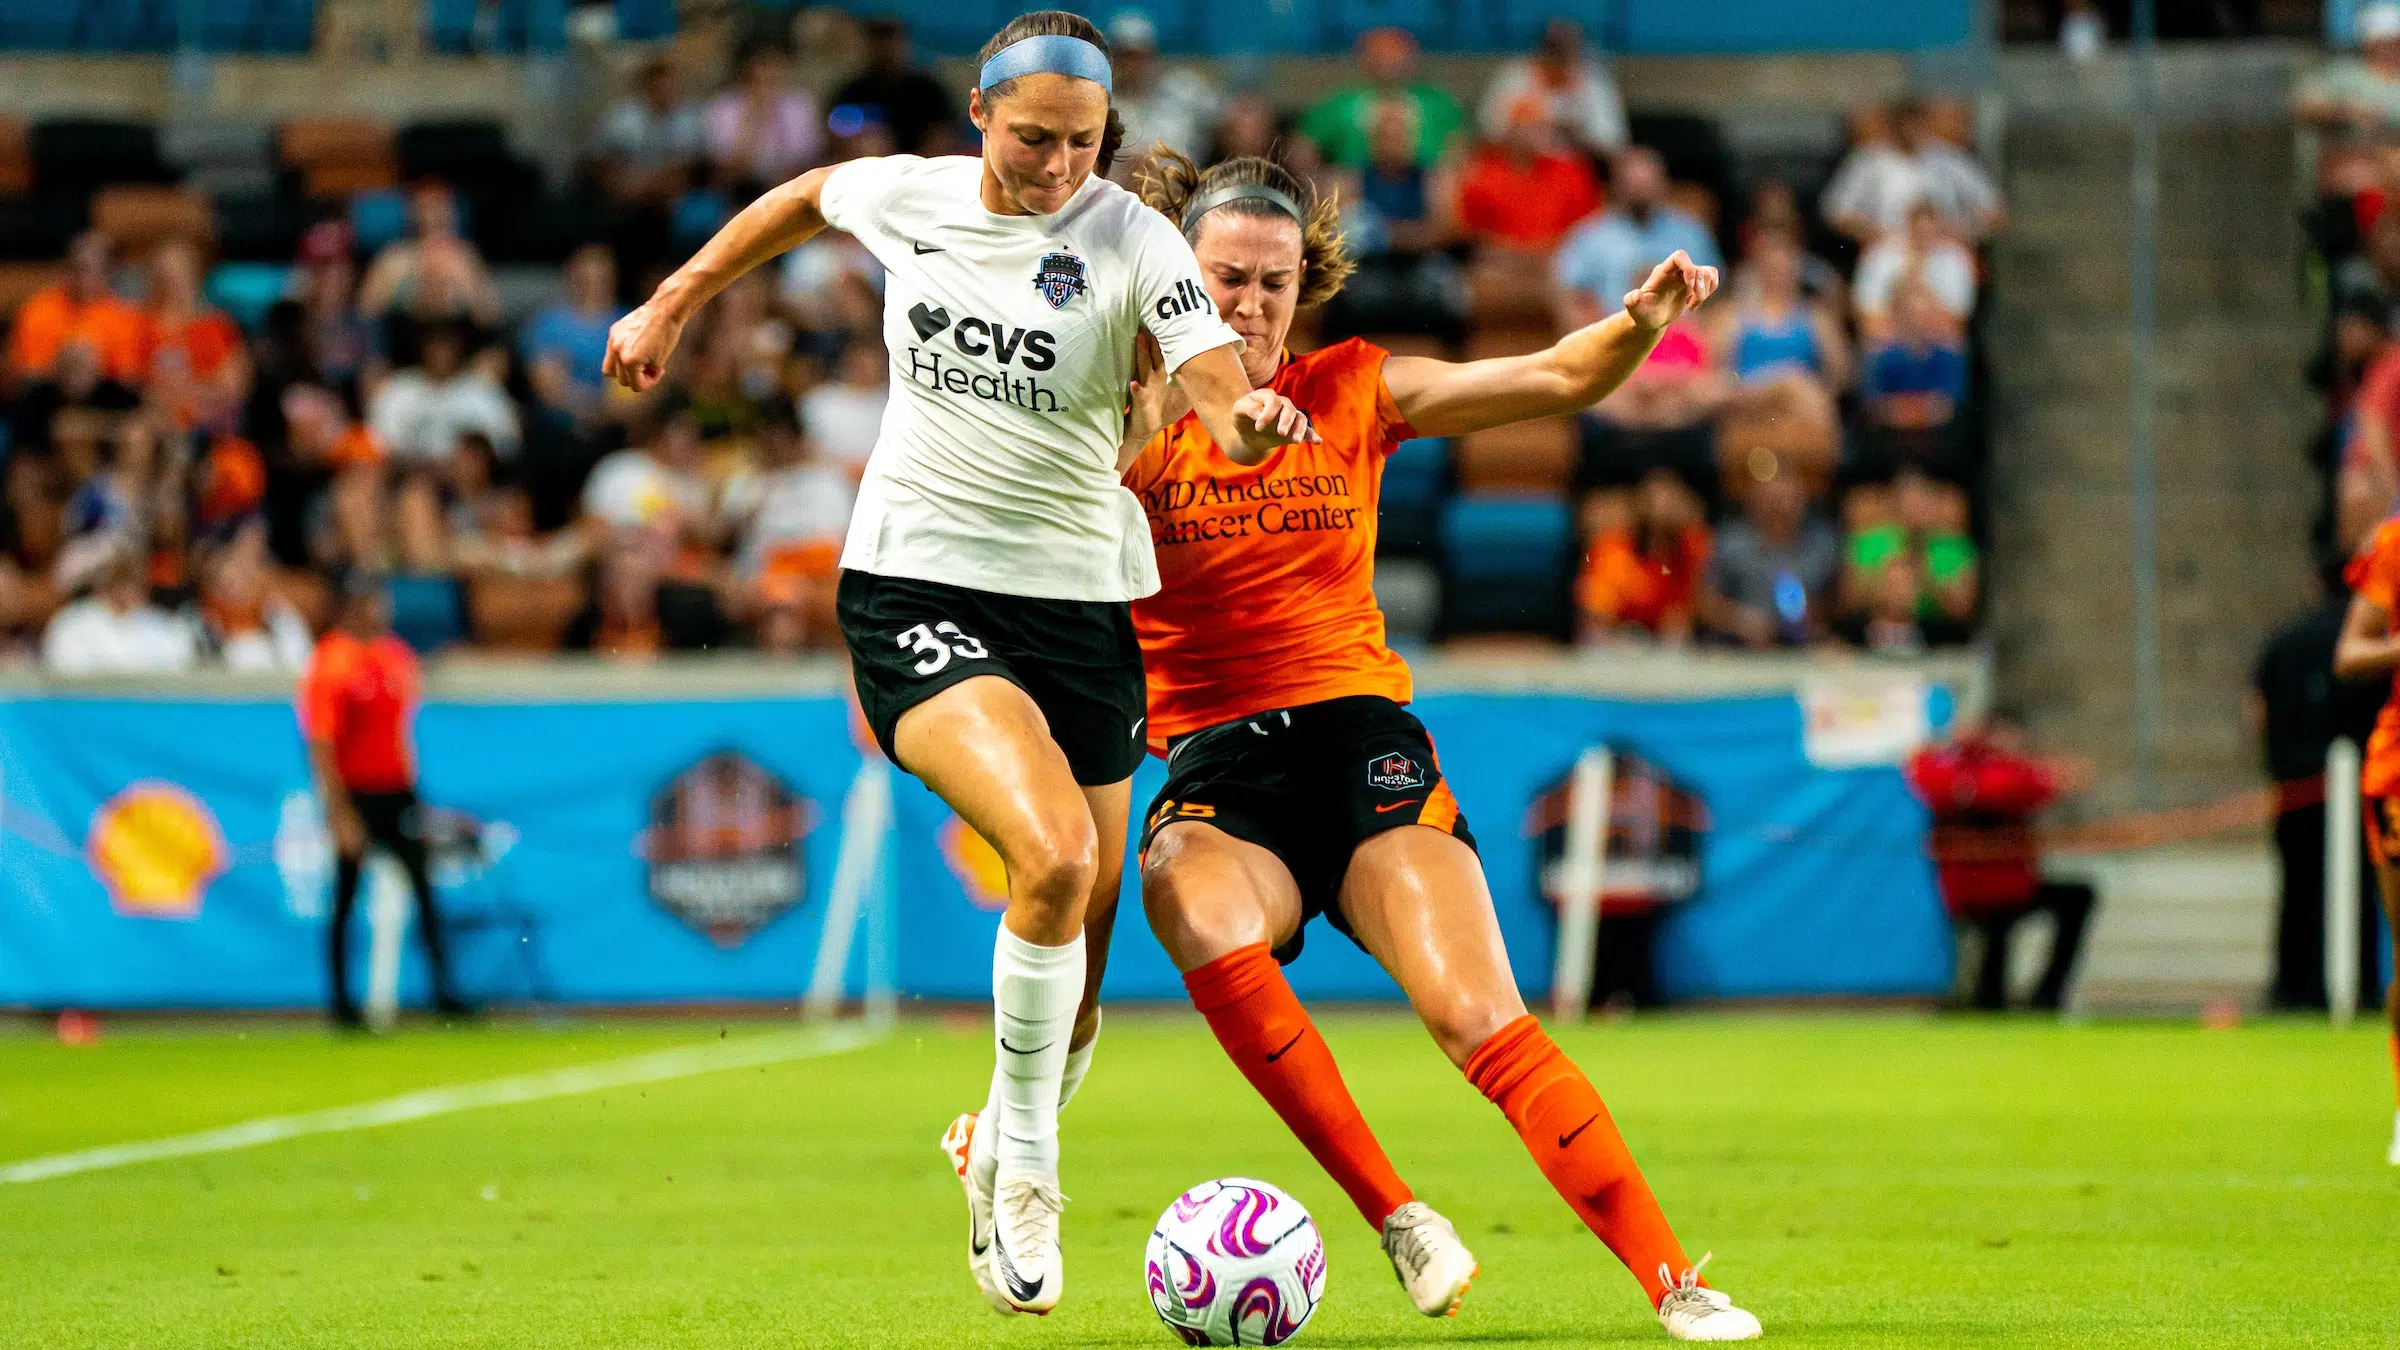 Ashley Hatch in a white top, black shorts, and white socks battles against a defender in an orange top, black shorts and orange socks for possession of a soccer ball.